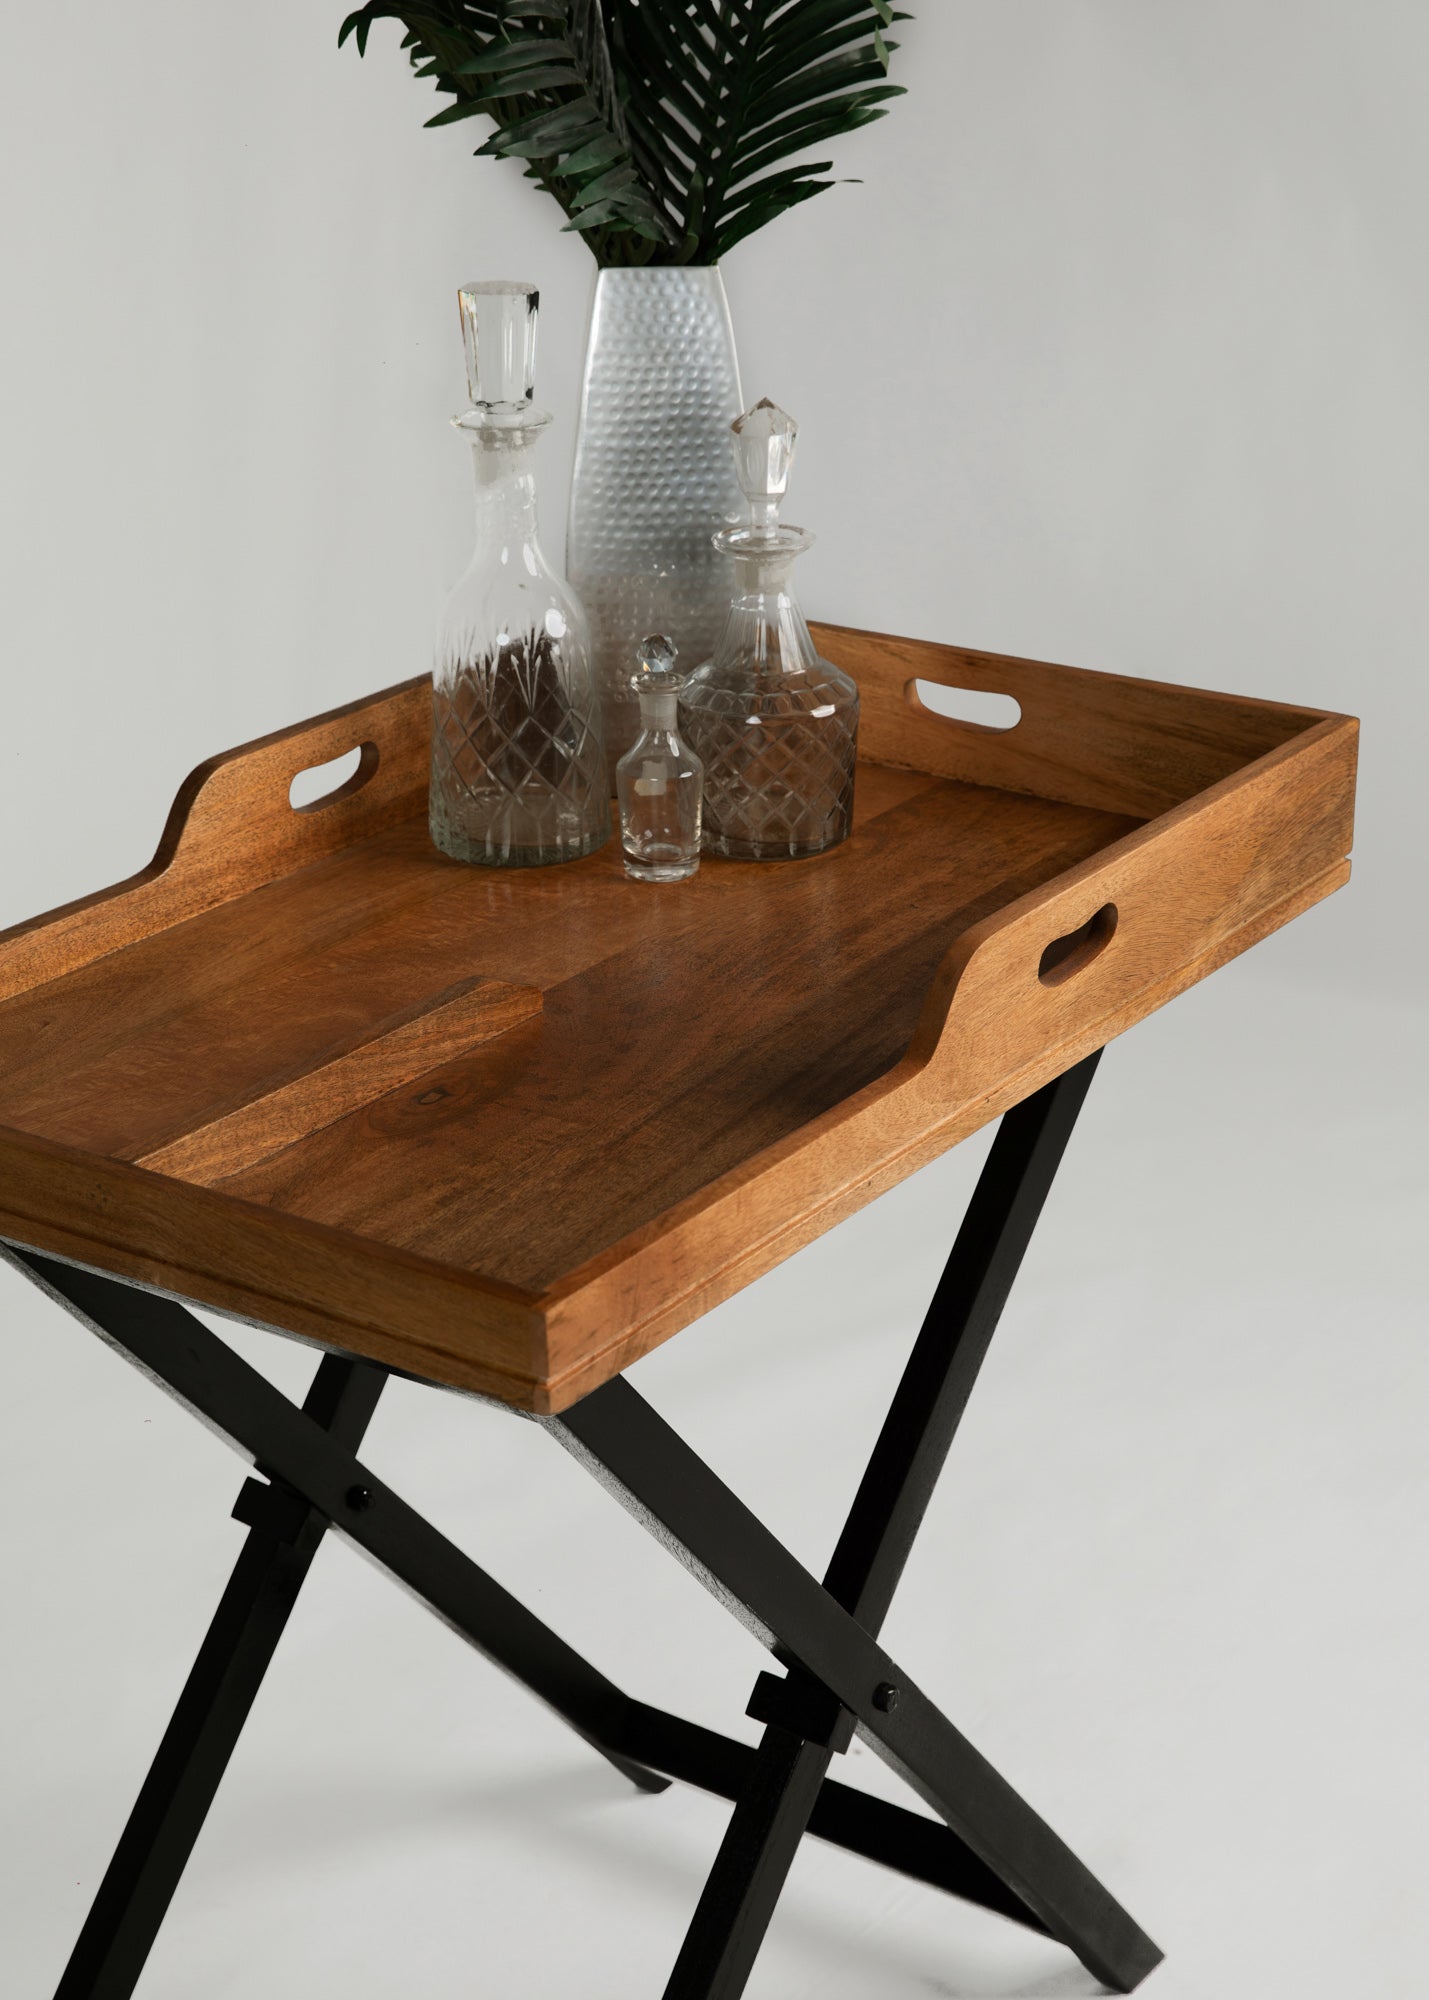 Accessories - Savana Living - One With Wood